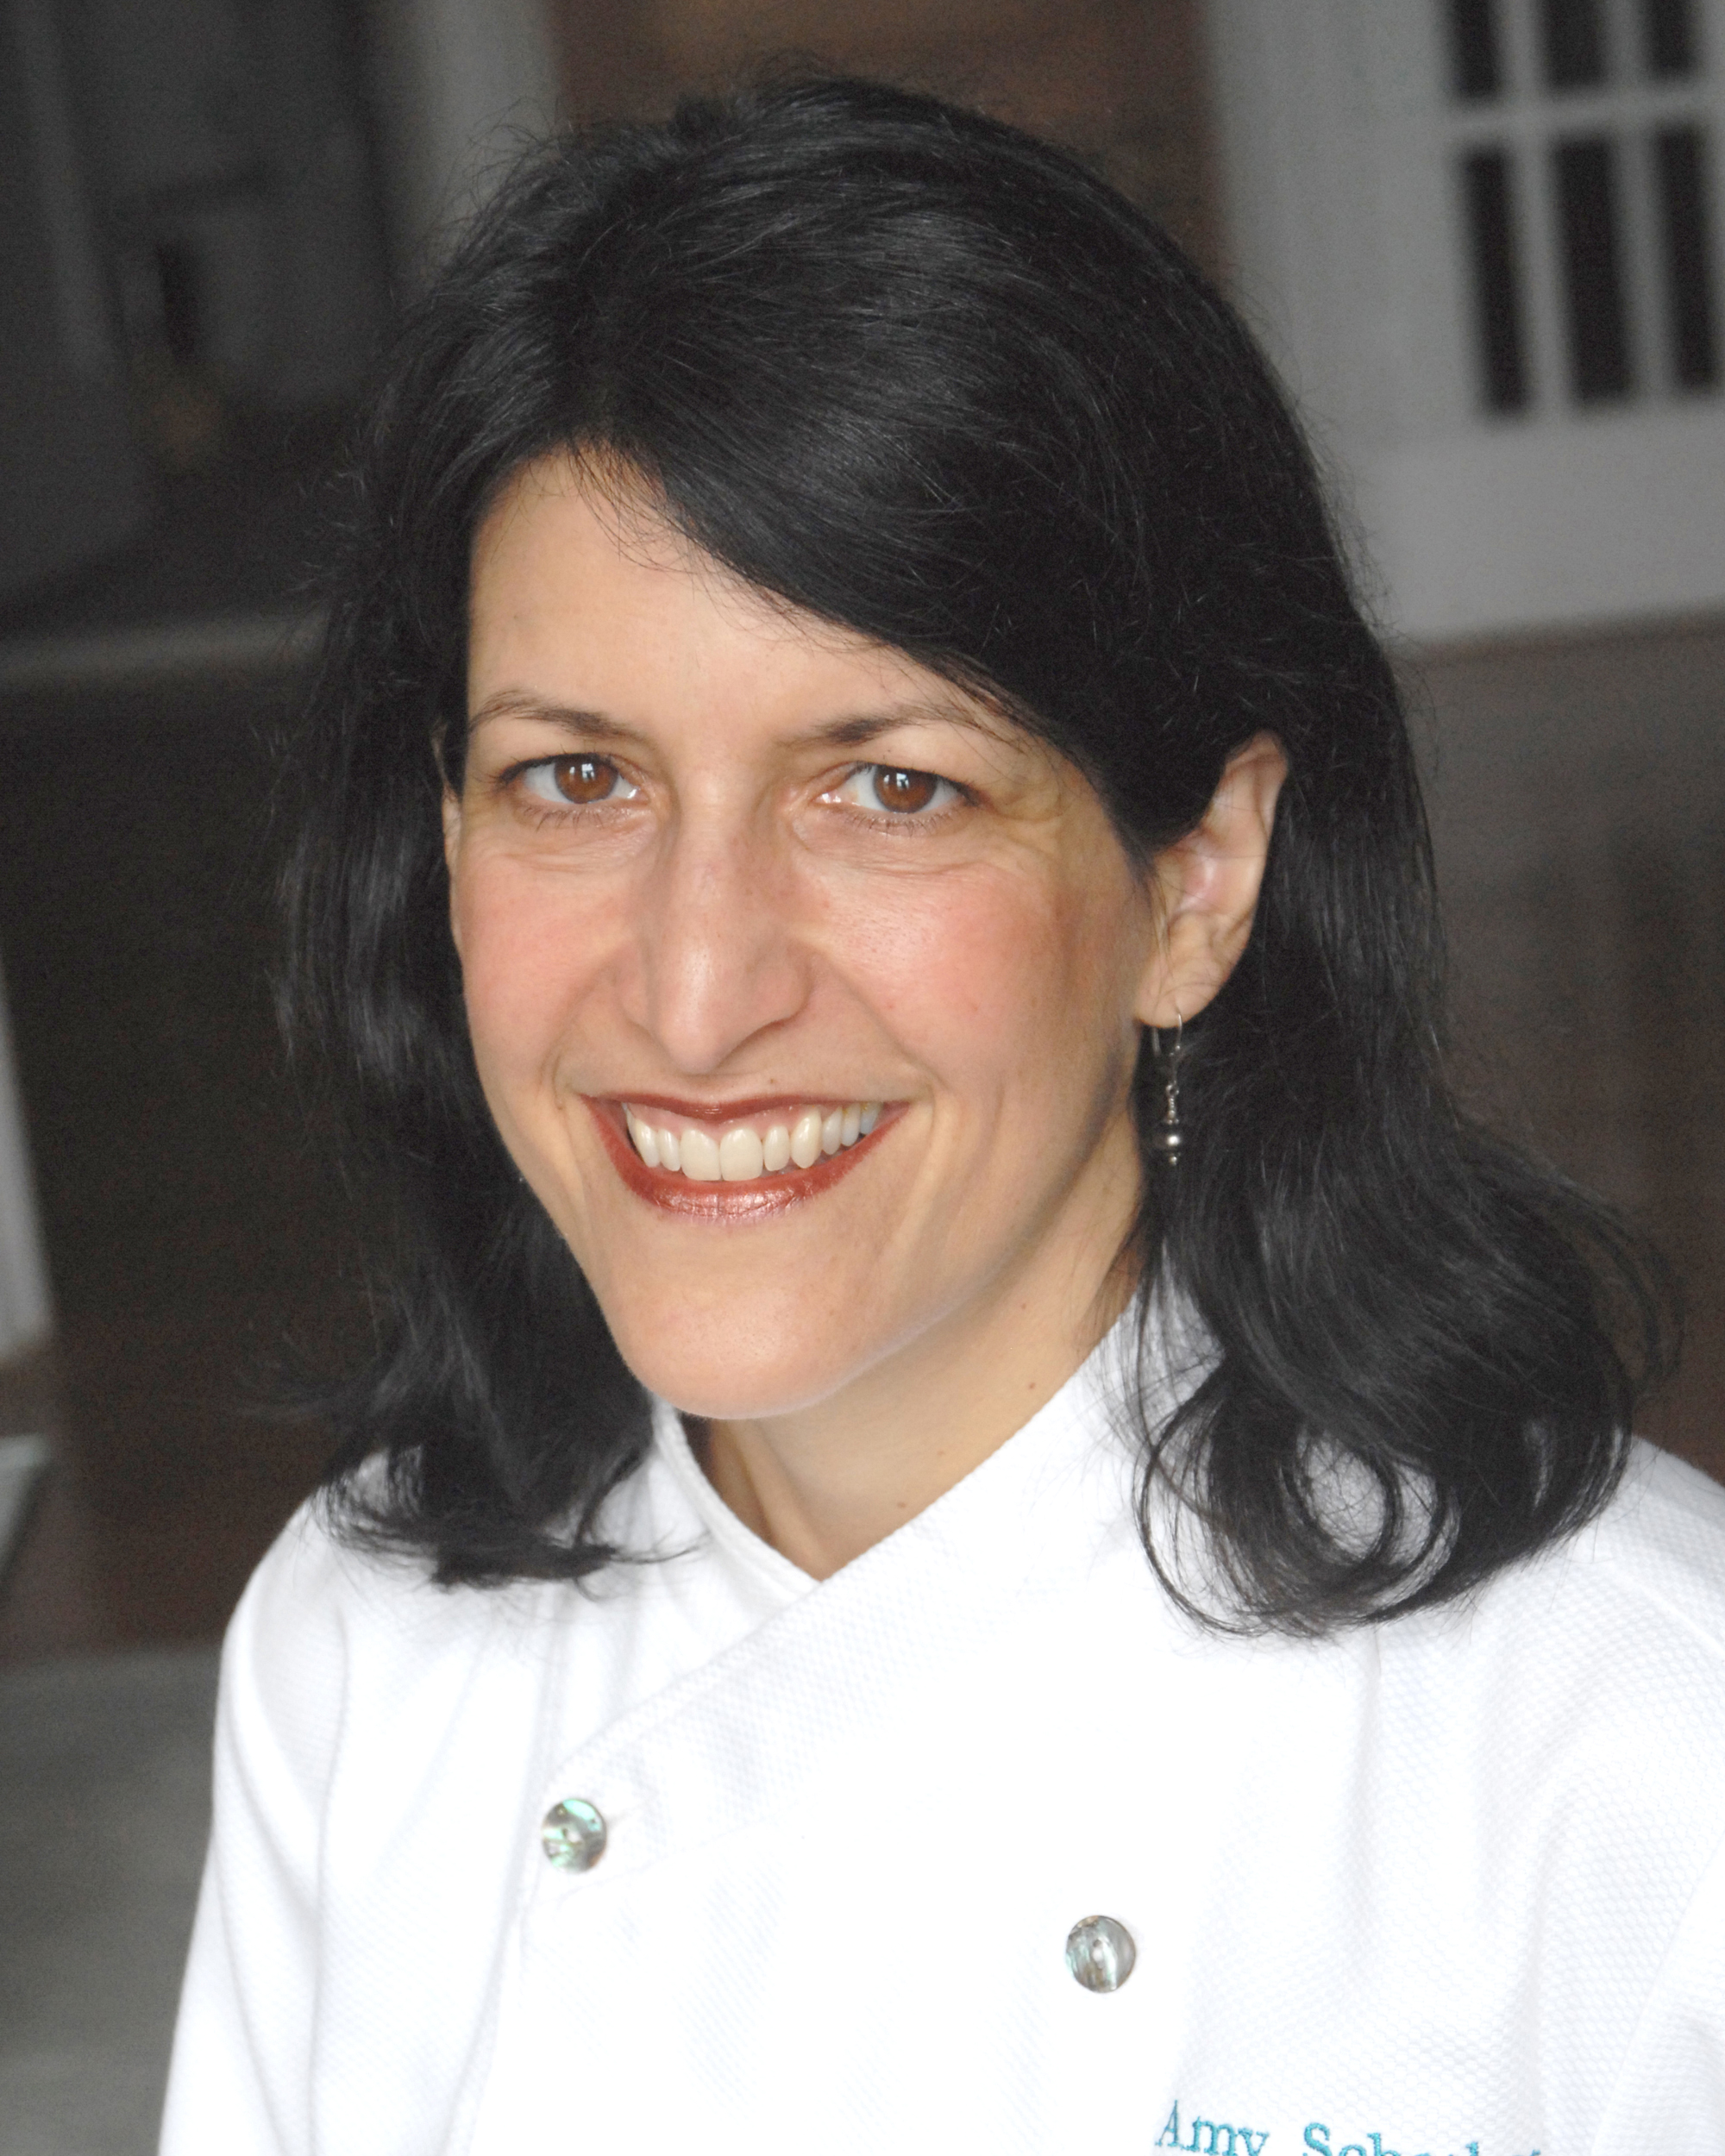 Amy Scherber, founder of Amy's Bread.